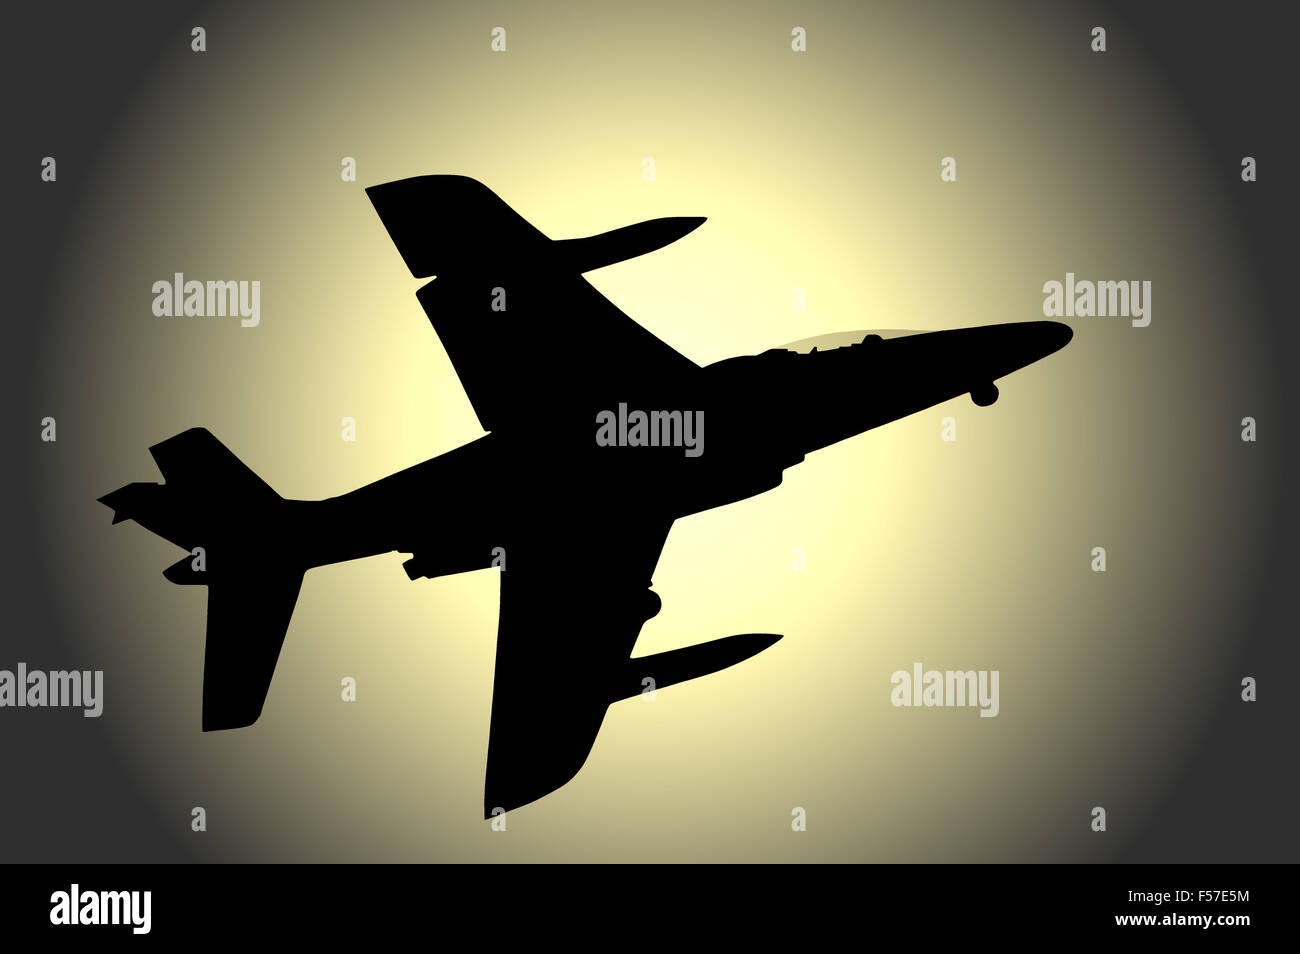 Fighter jet, silhouette Stock Photo